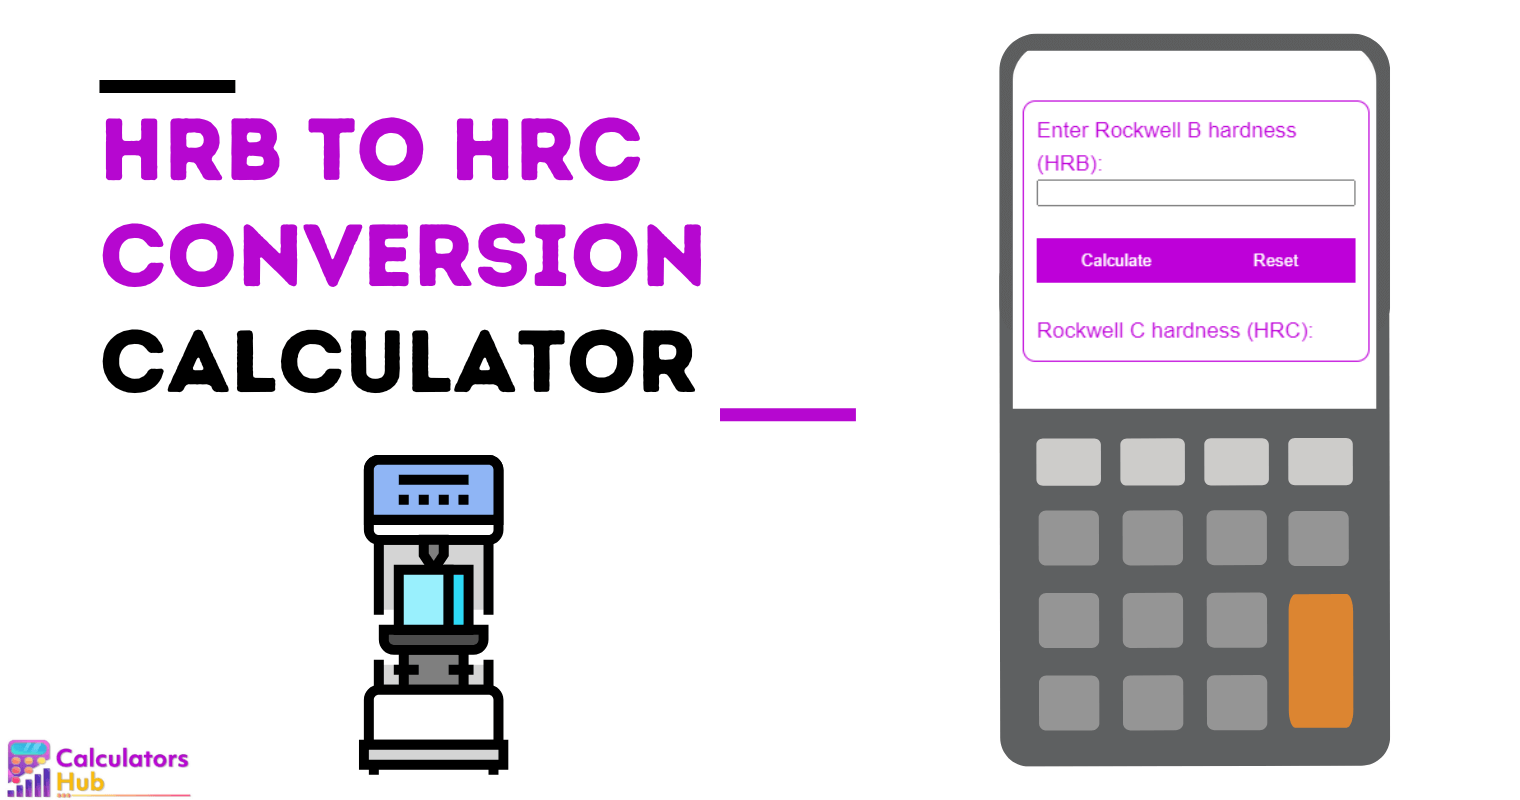 HRB to HRC Conversion Calculator